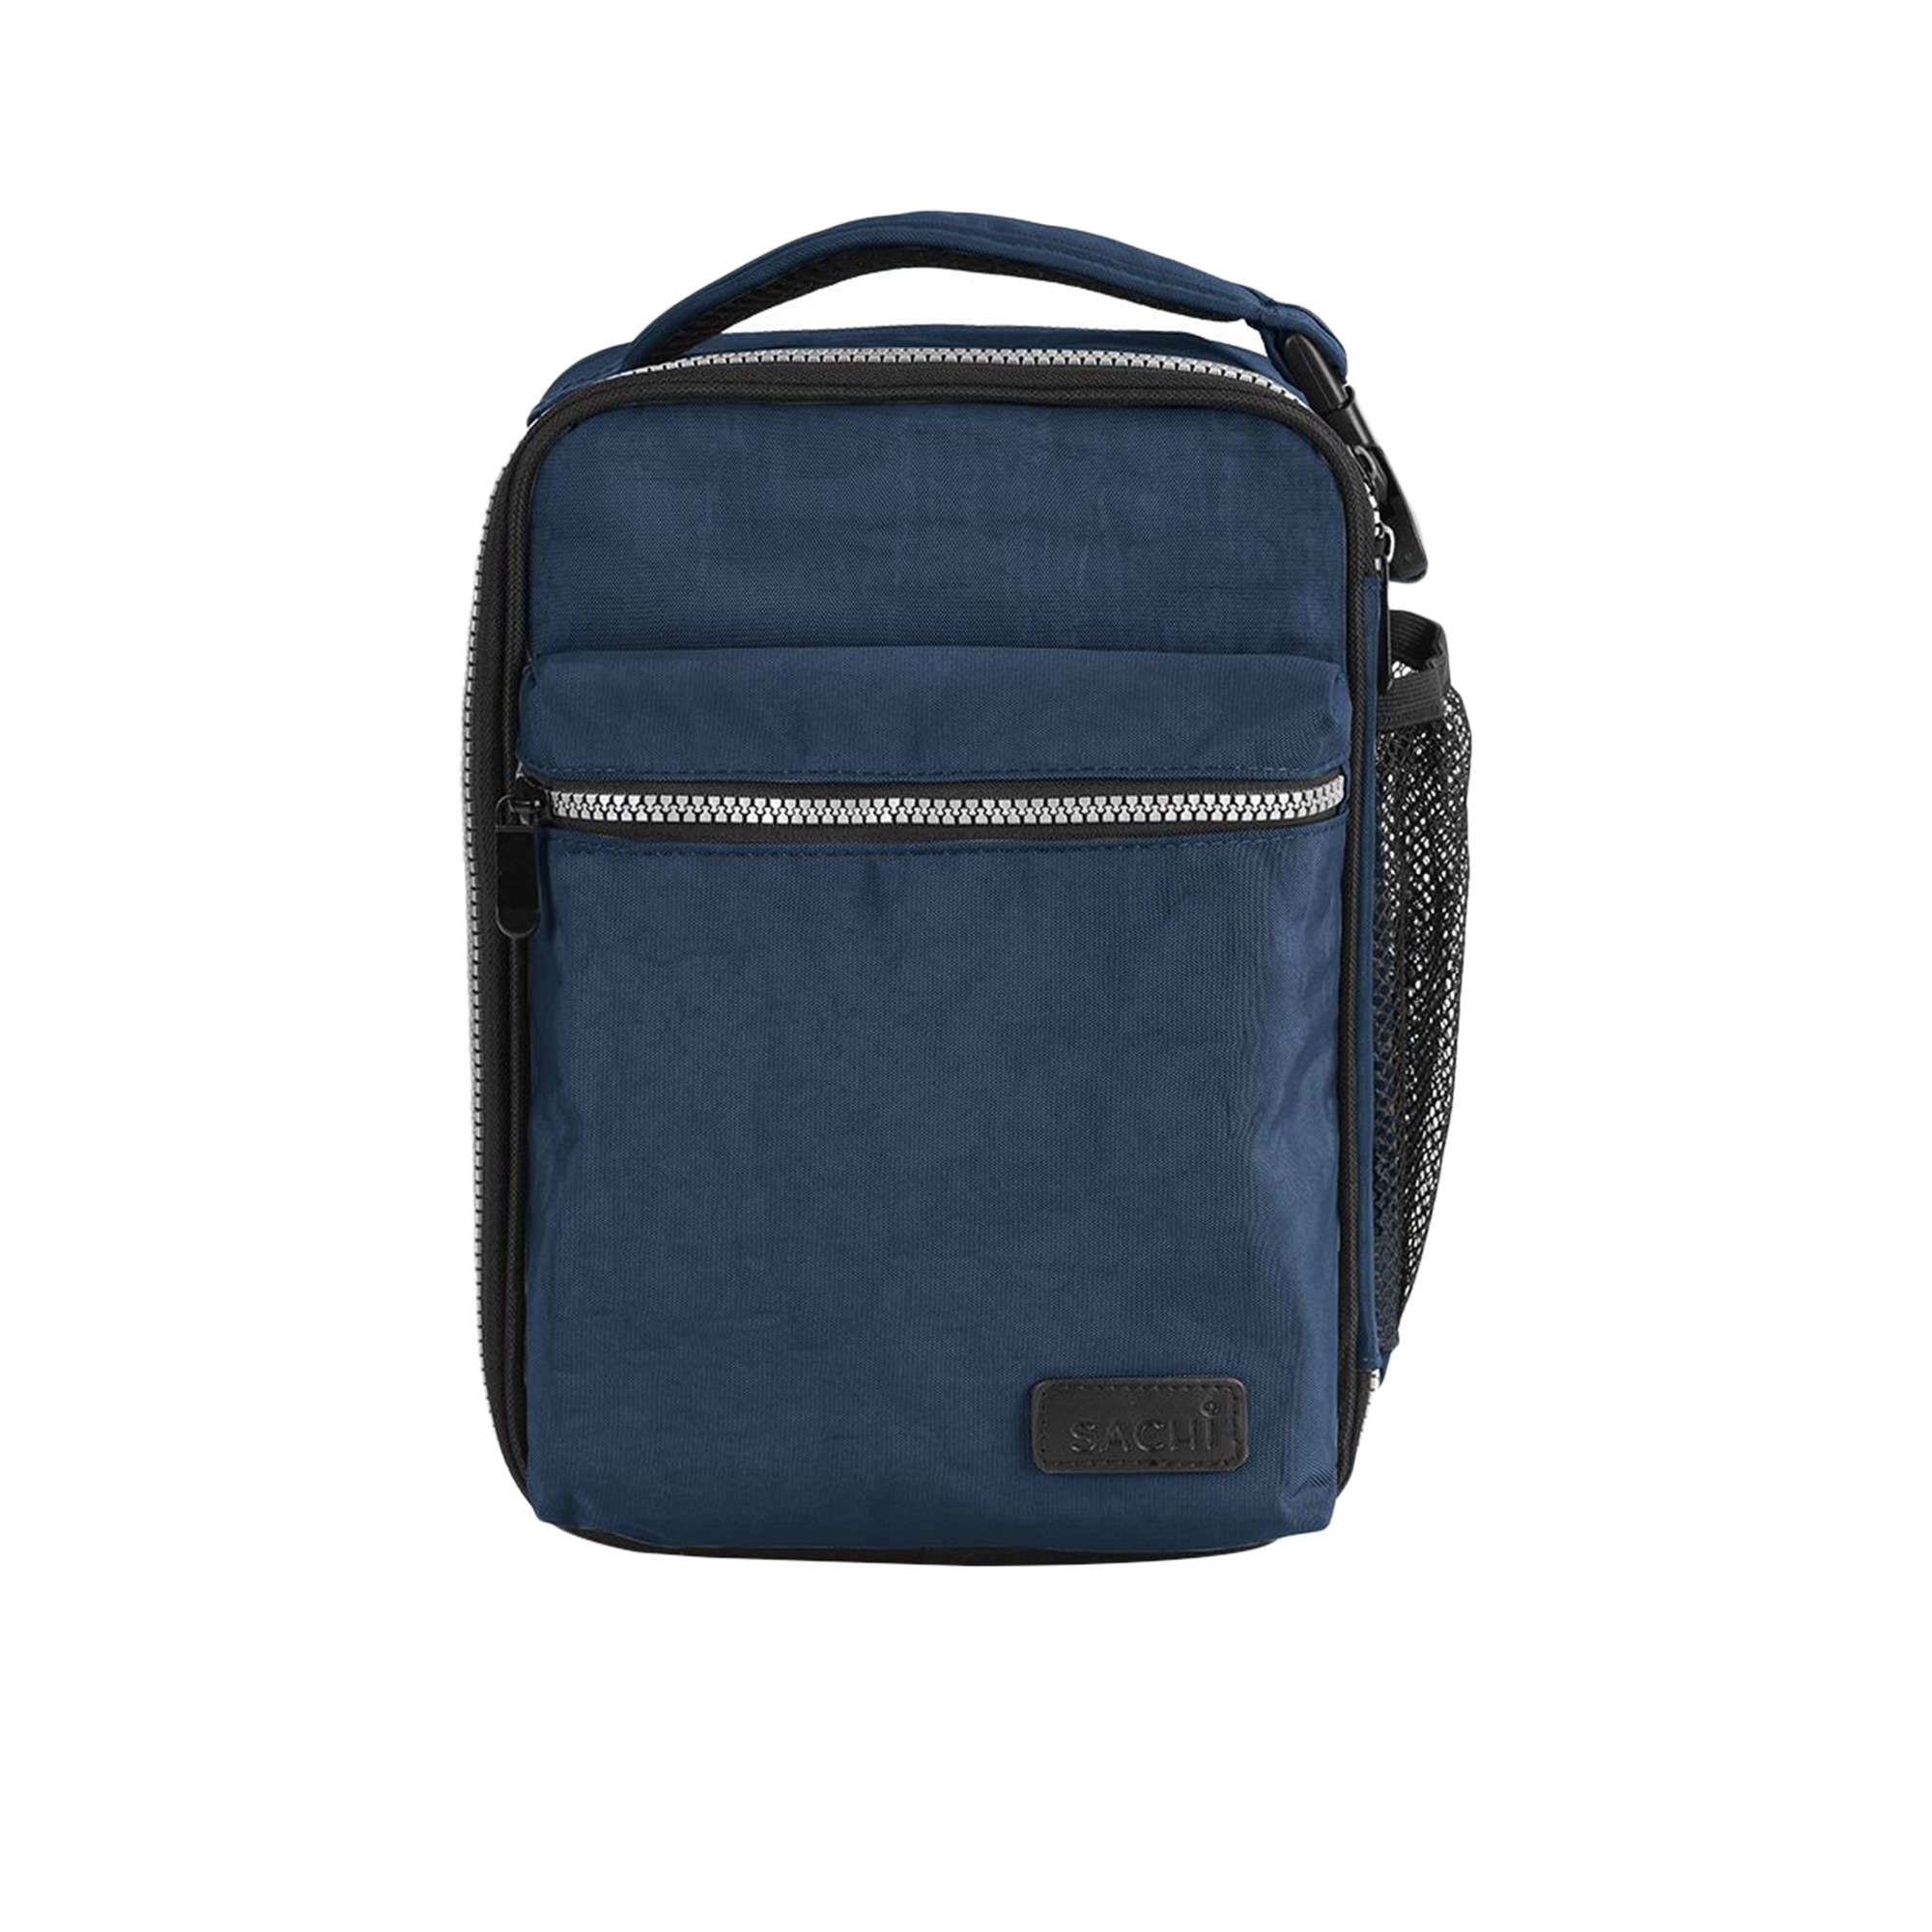 Sachi Explorer Insulated Lunch Bag Navy Image 2